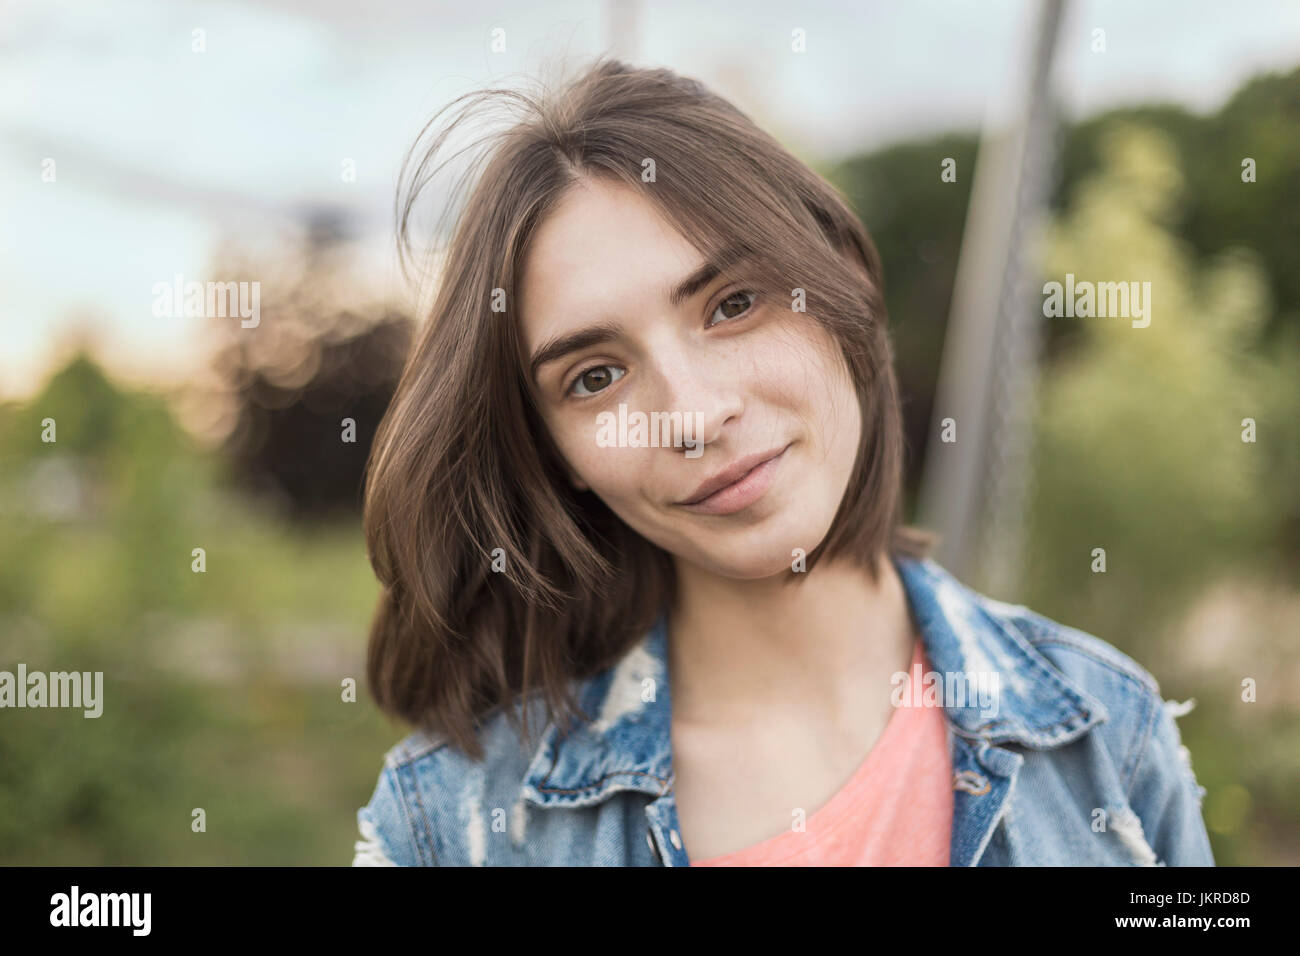 Portrait of smiling young woman with head cocked at park Stock Photo